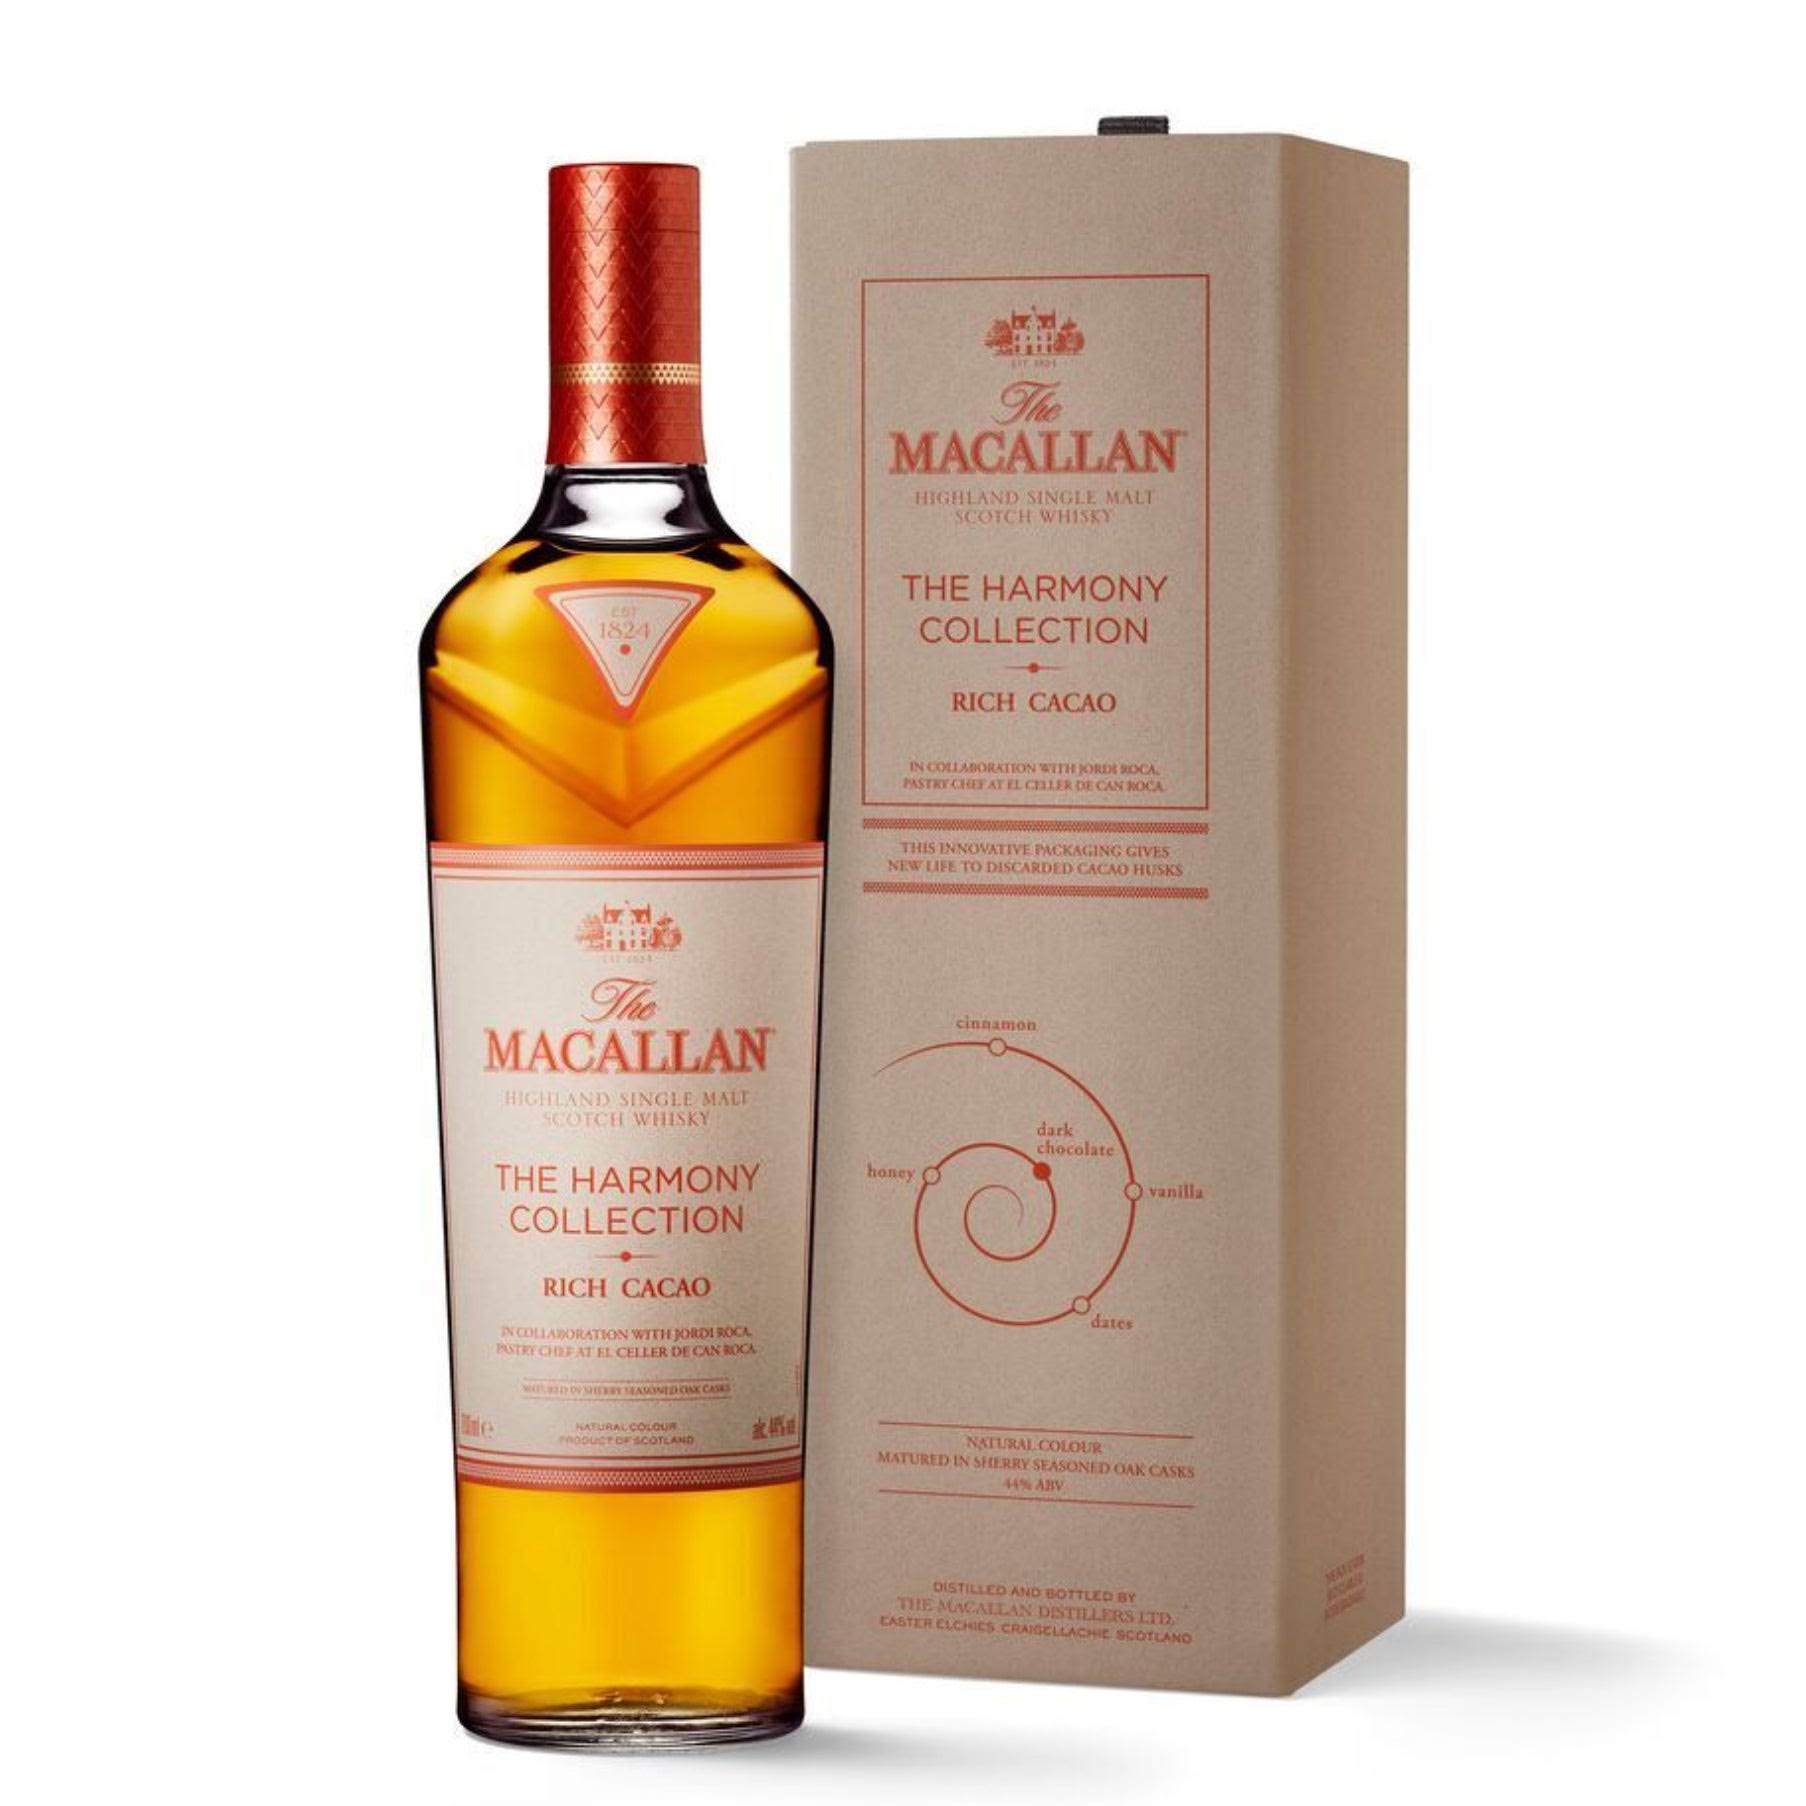 The Macallan Harmony Collection Rich Cacao 750 ml